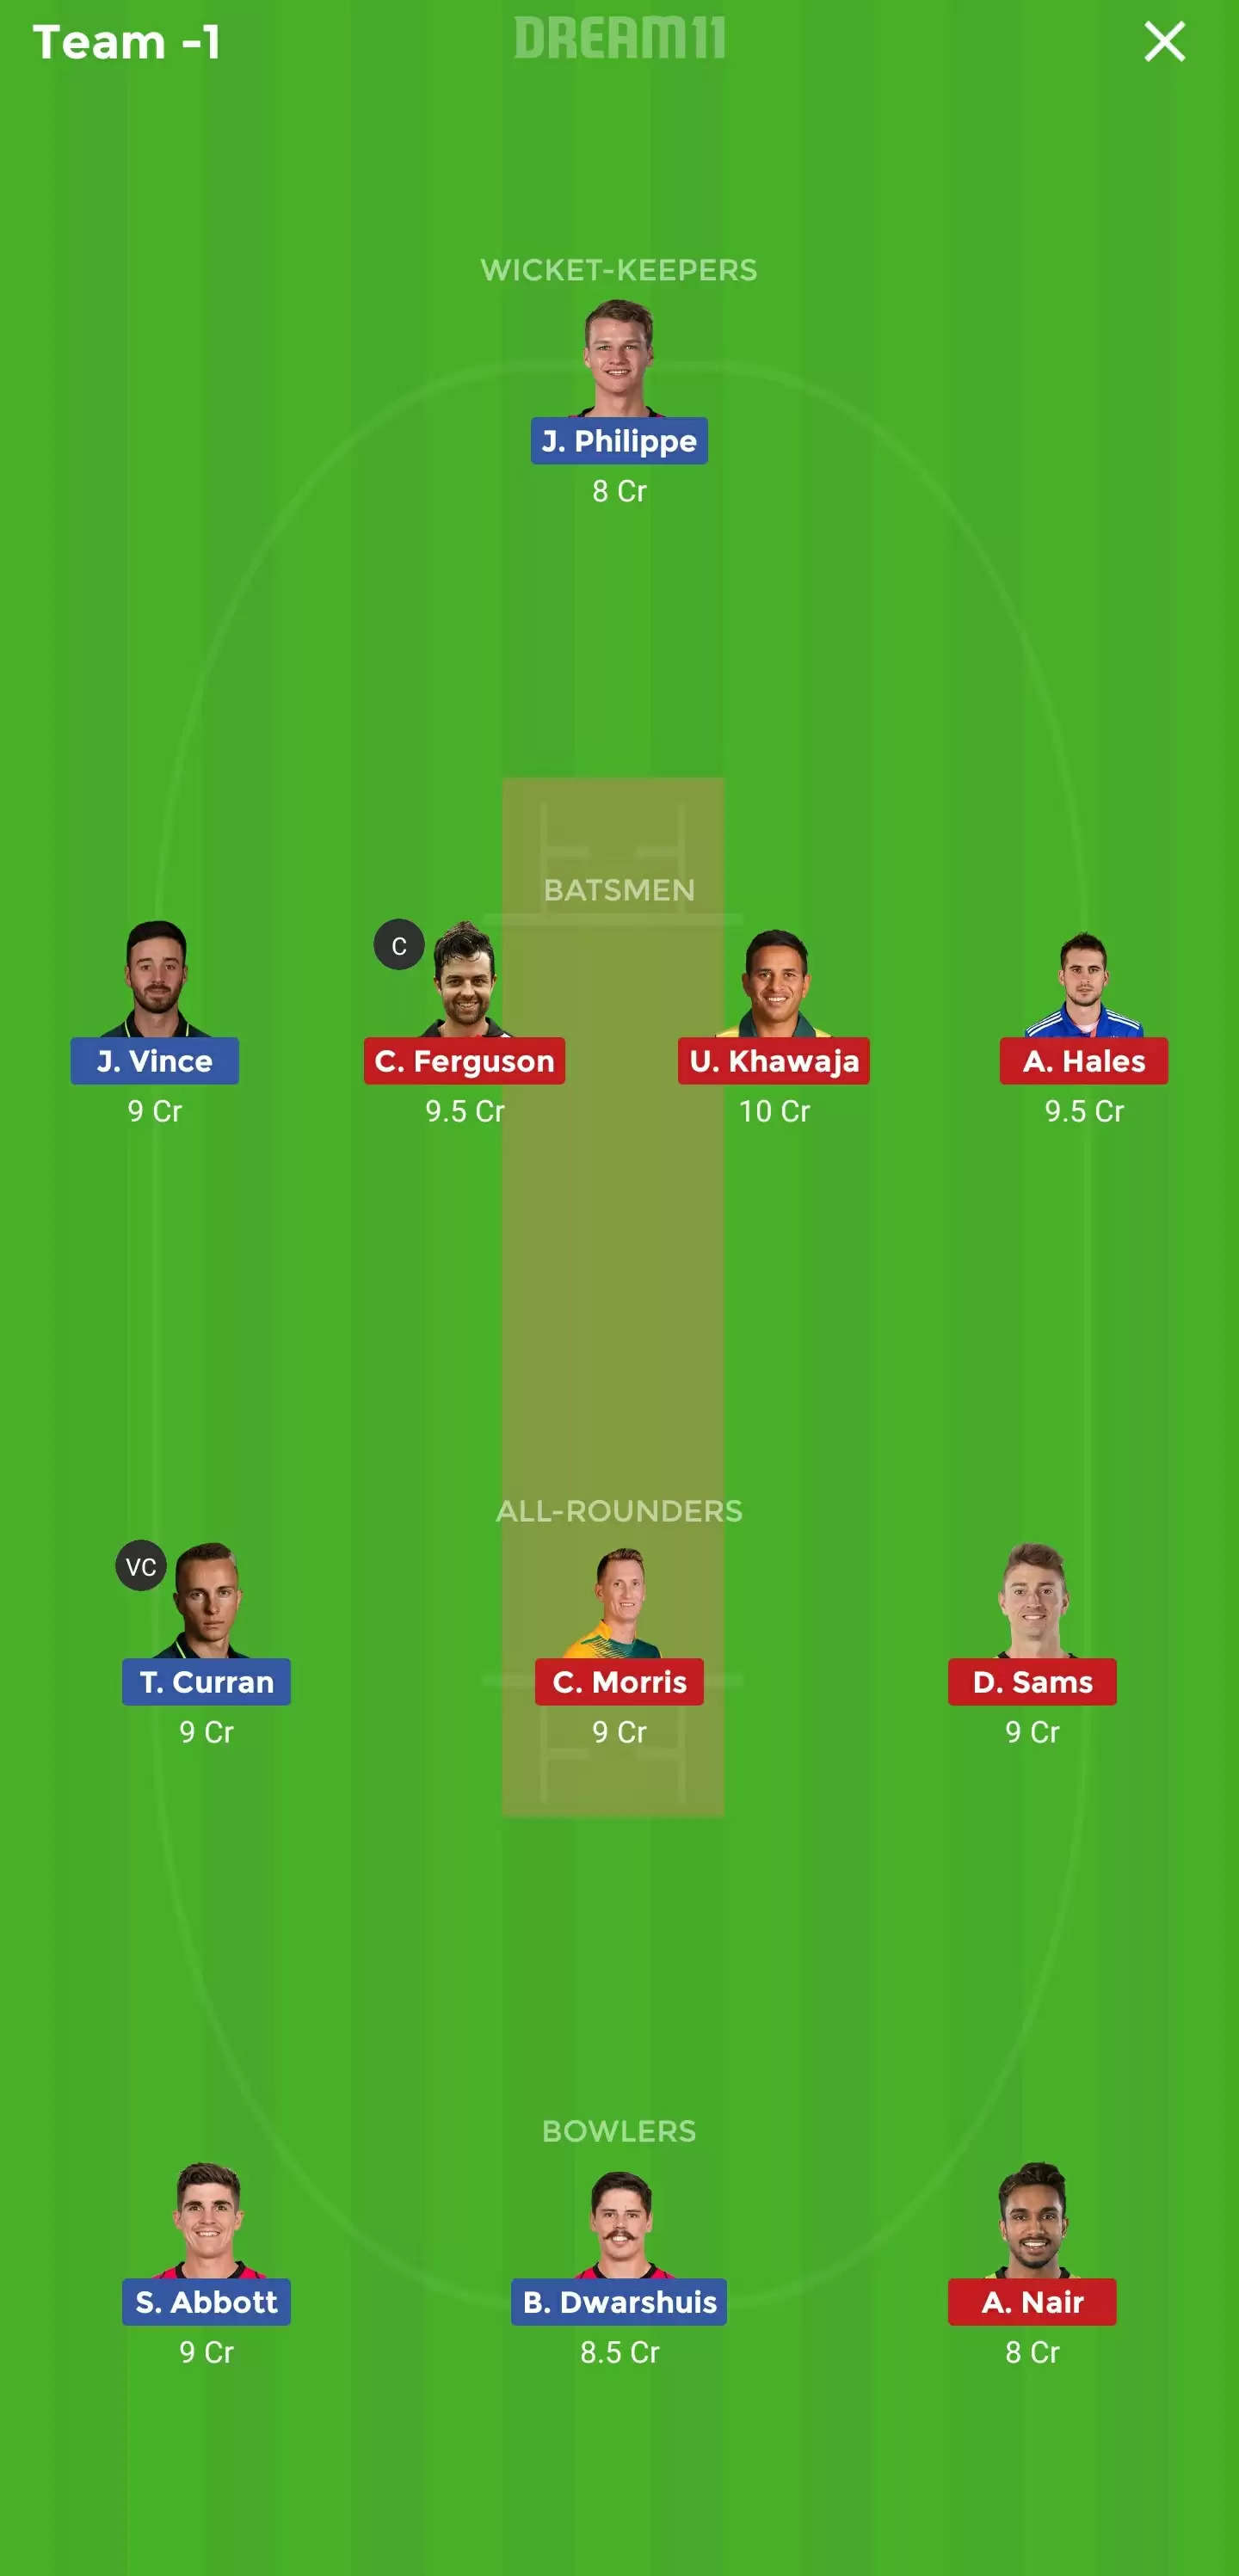 Big Bash League: SIX vs THU Dream11 Prediction, Fantasy Cricket Tips, Playing XI, Team, Pitch Report and Weather Conditions